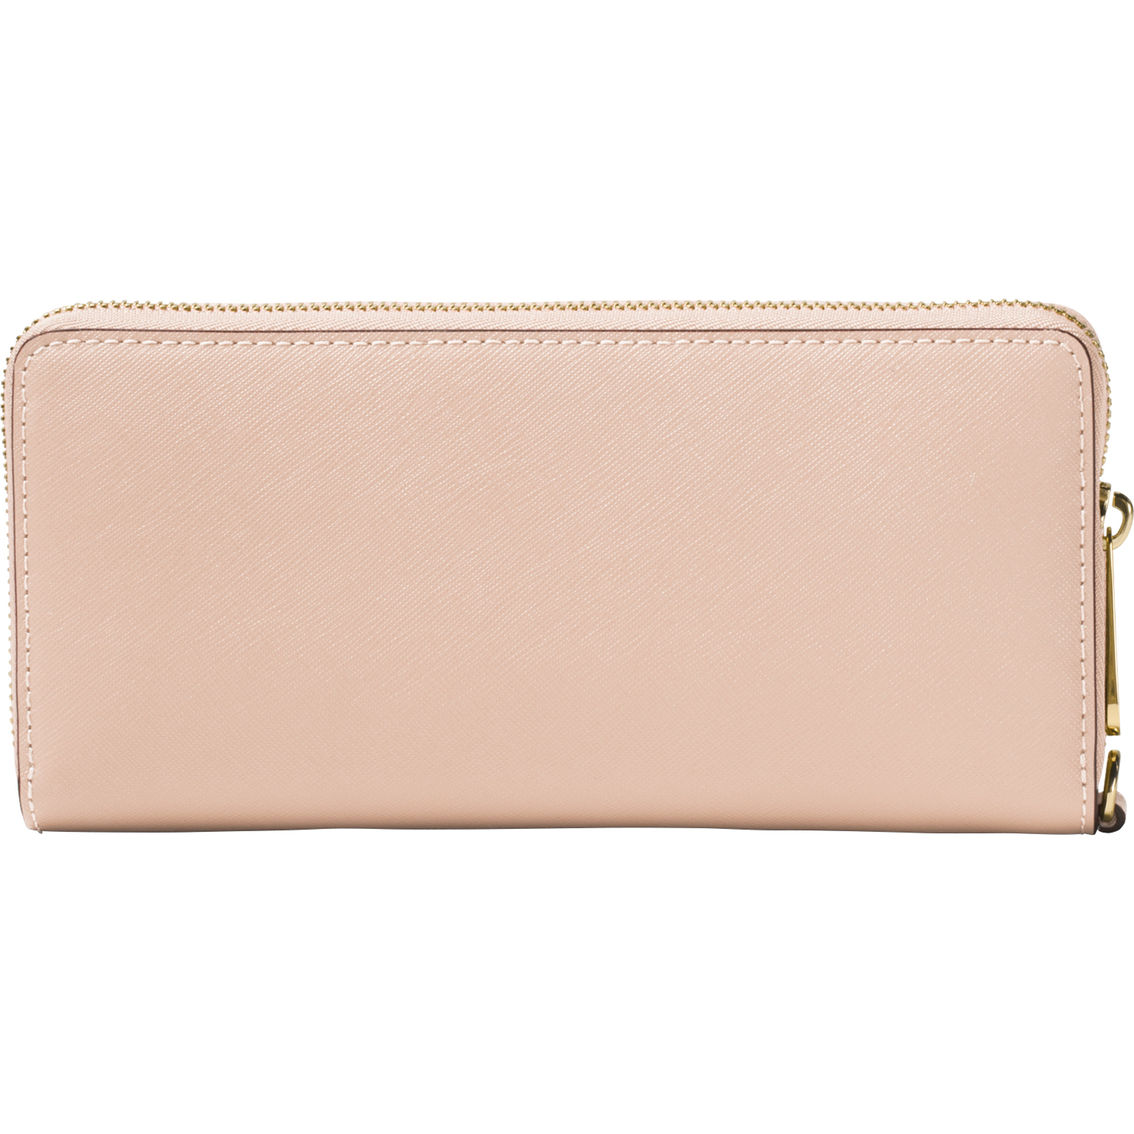 Michael Kors Travel Continental Wallet Leather | Wallets | Clothing ...